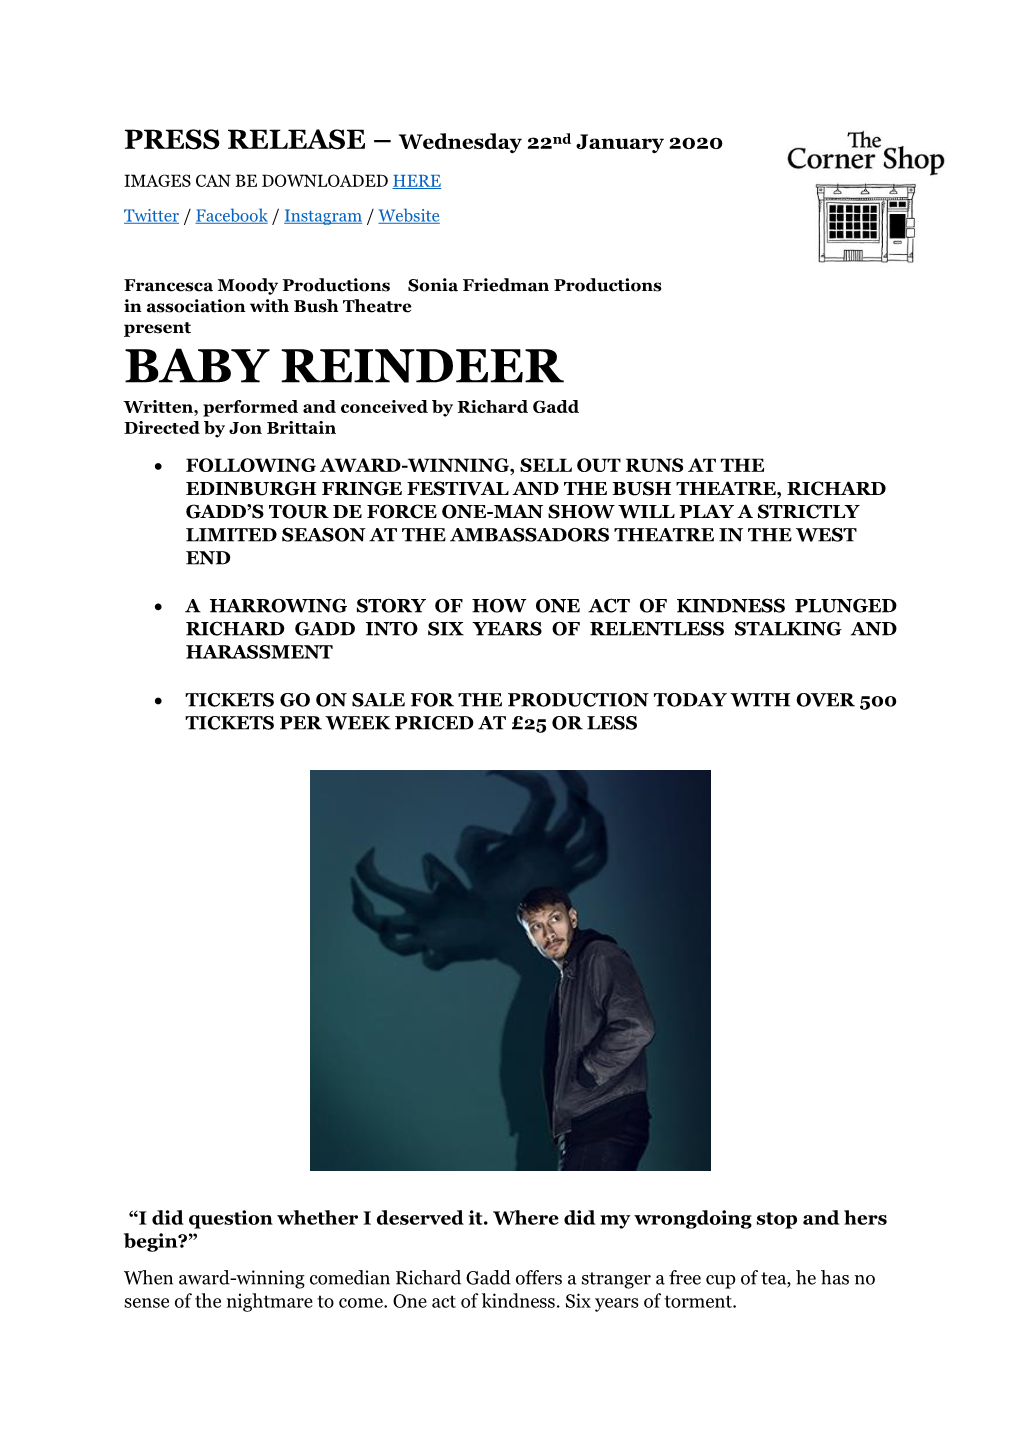 BABY REINDEER Written, Performed and Conceived by Richard Gadd Directed by Jon Brittain